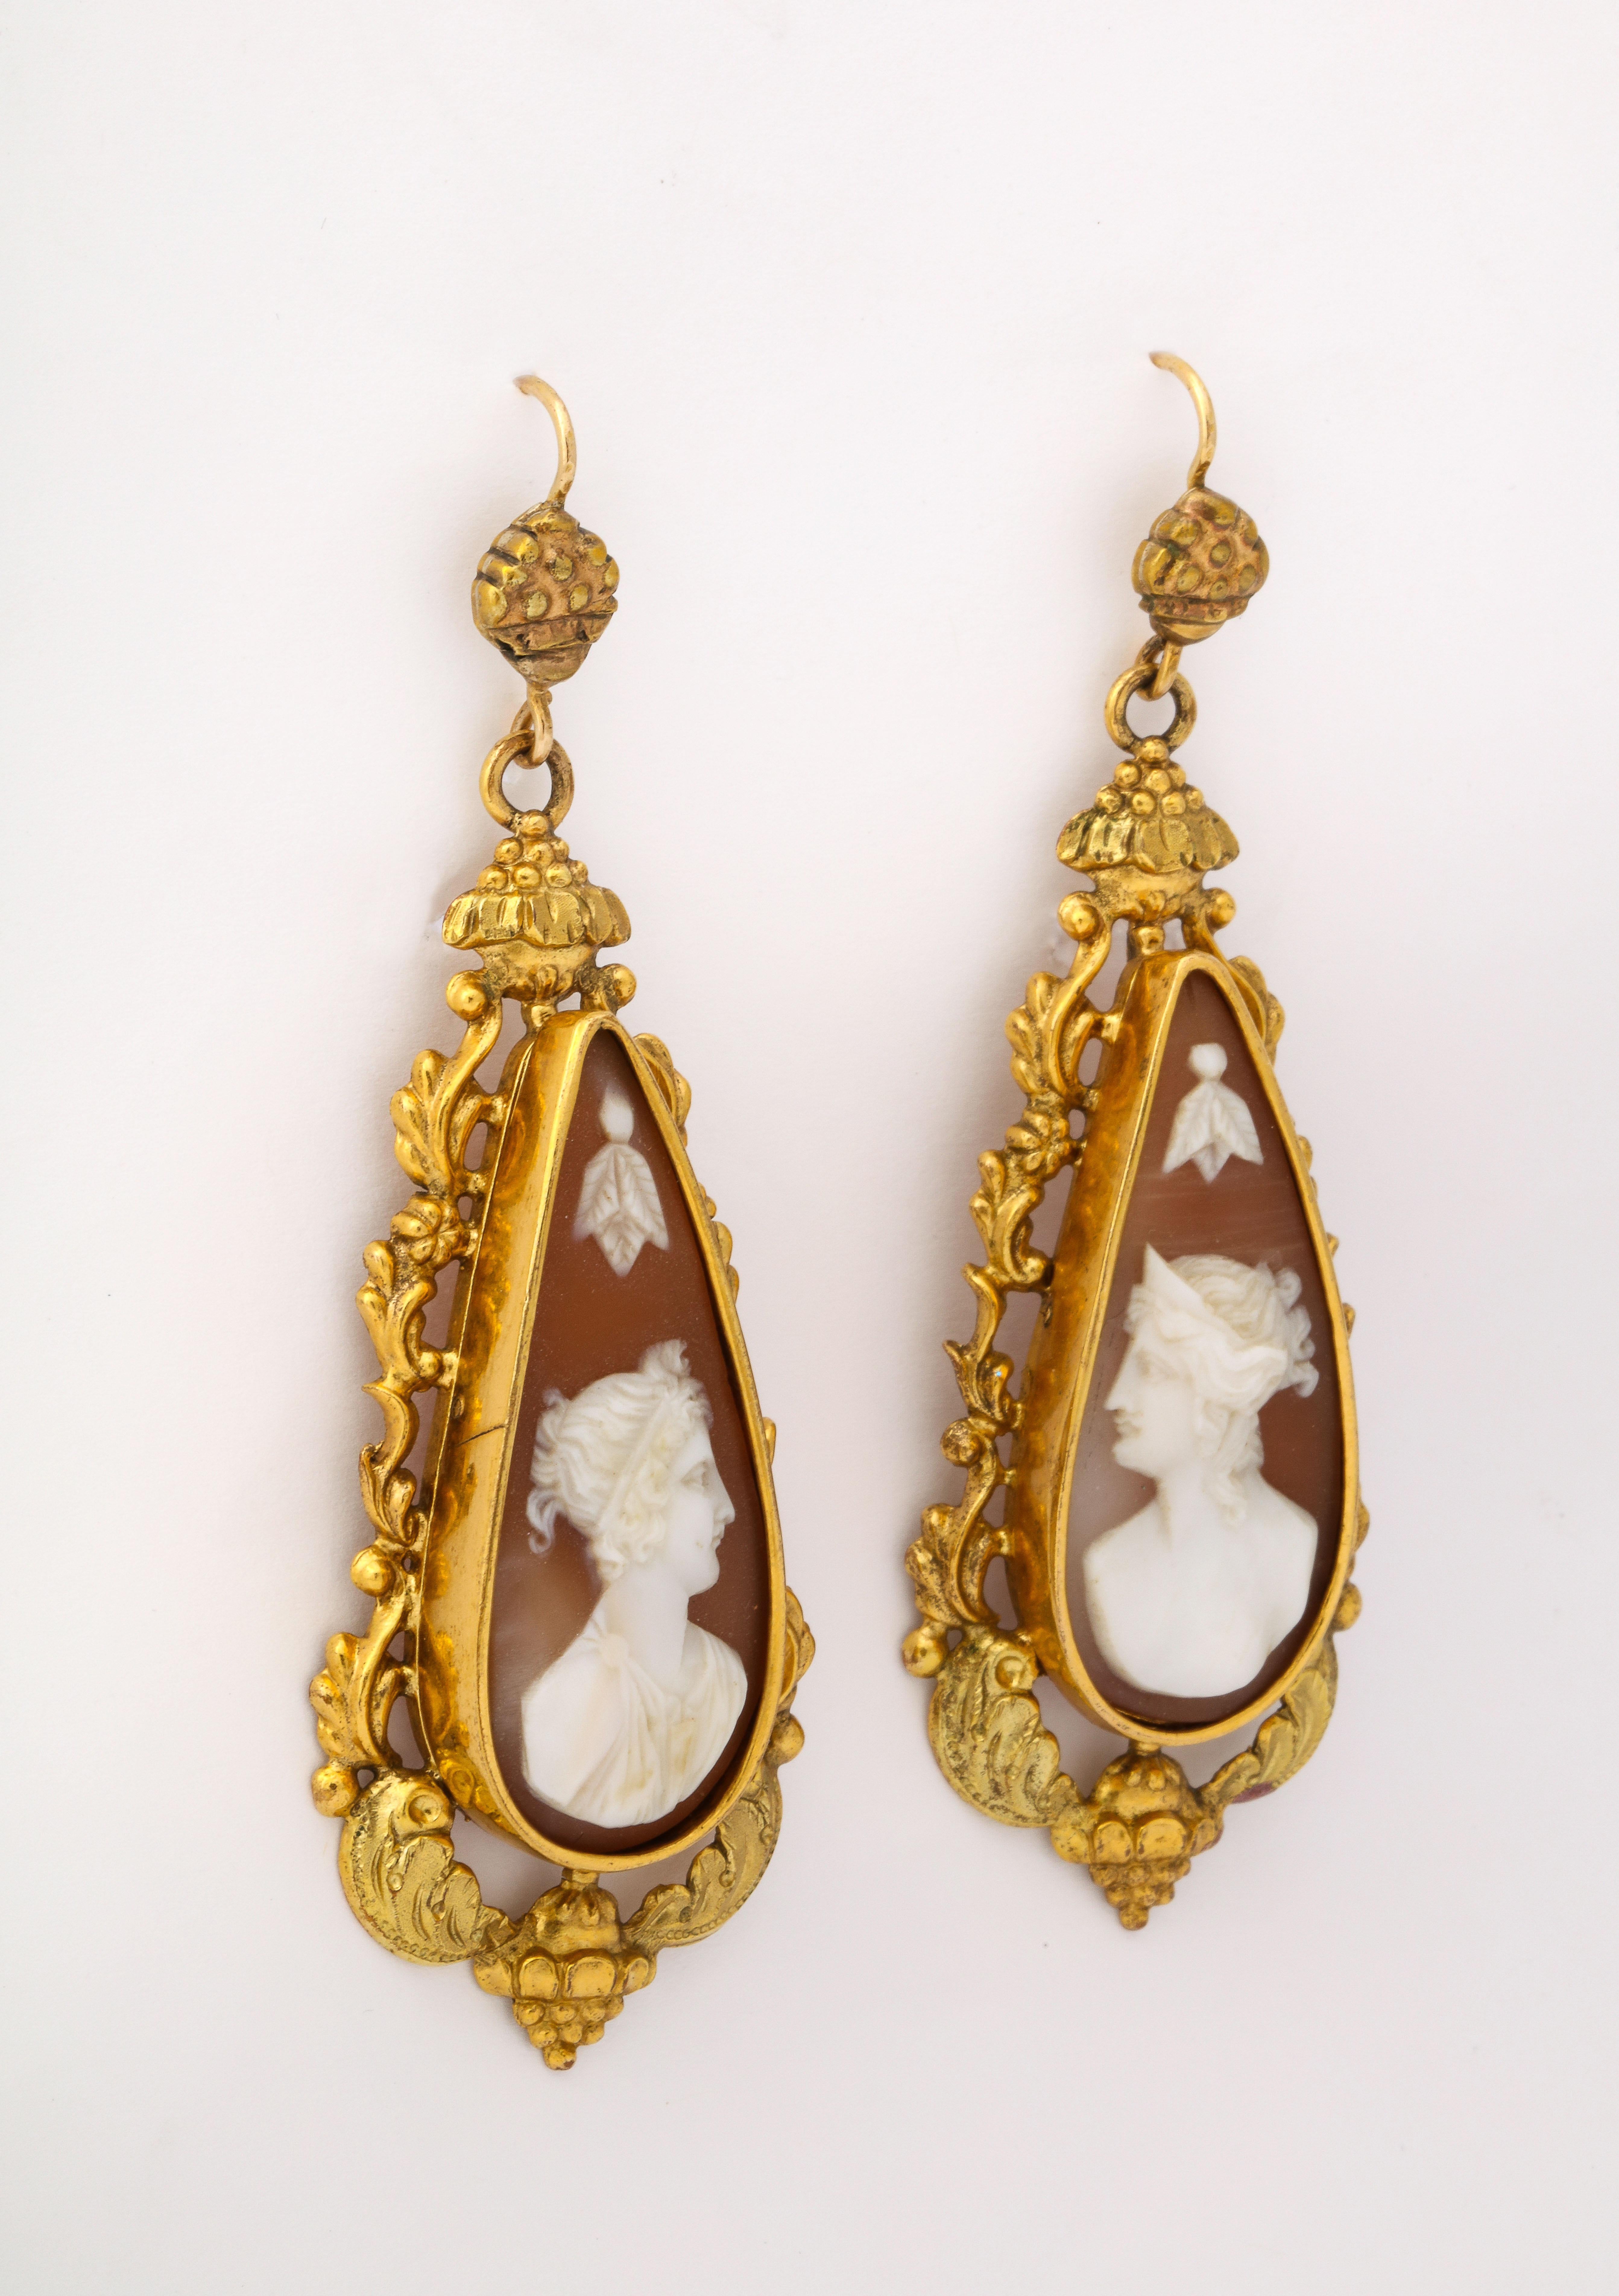 The rare, collectable metal, Pinchbeck, is setting for 18th century shell cameos of a male and female god and goddess. The earrings are all original including the tops and after more than 200 years are in perfect condition. Typical of Georgian